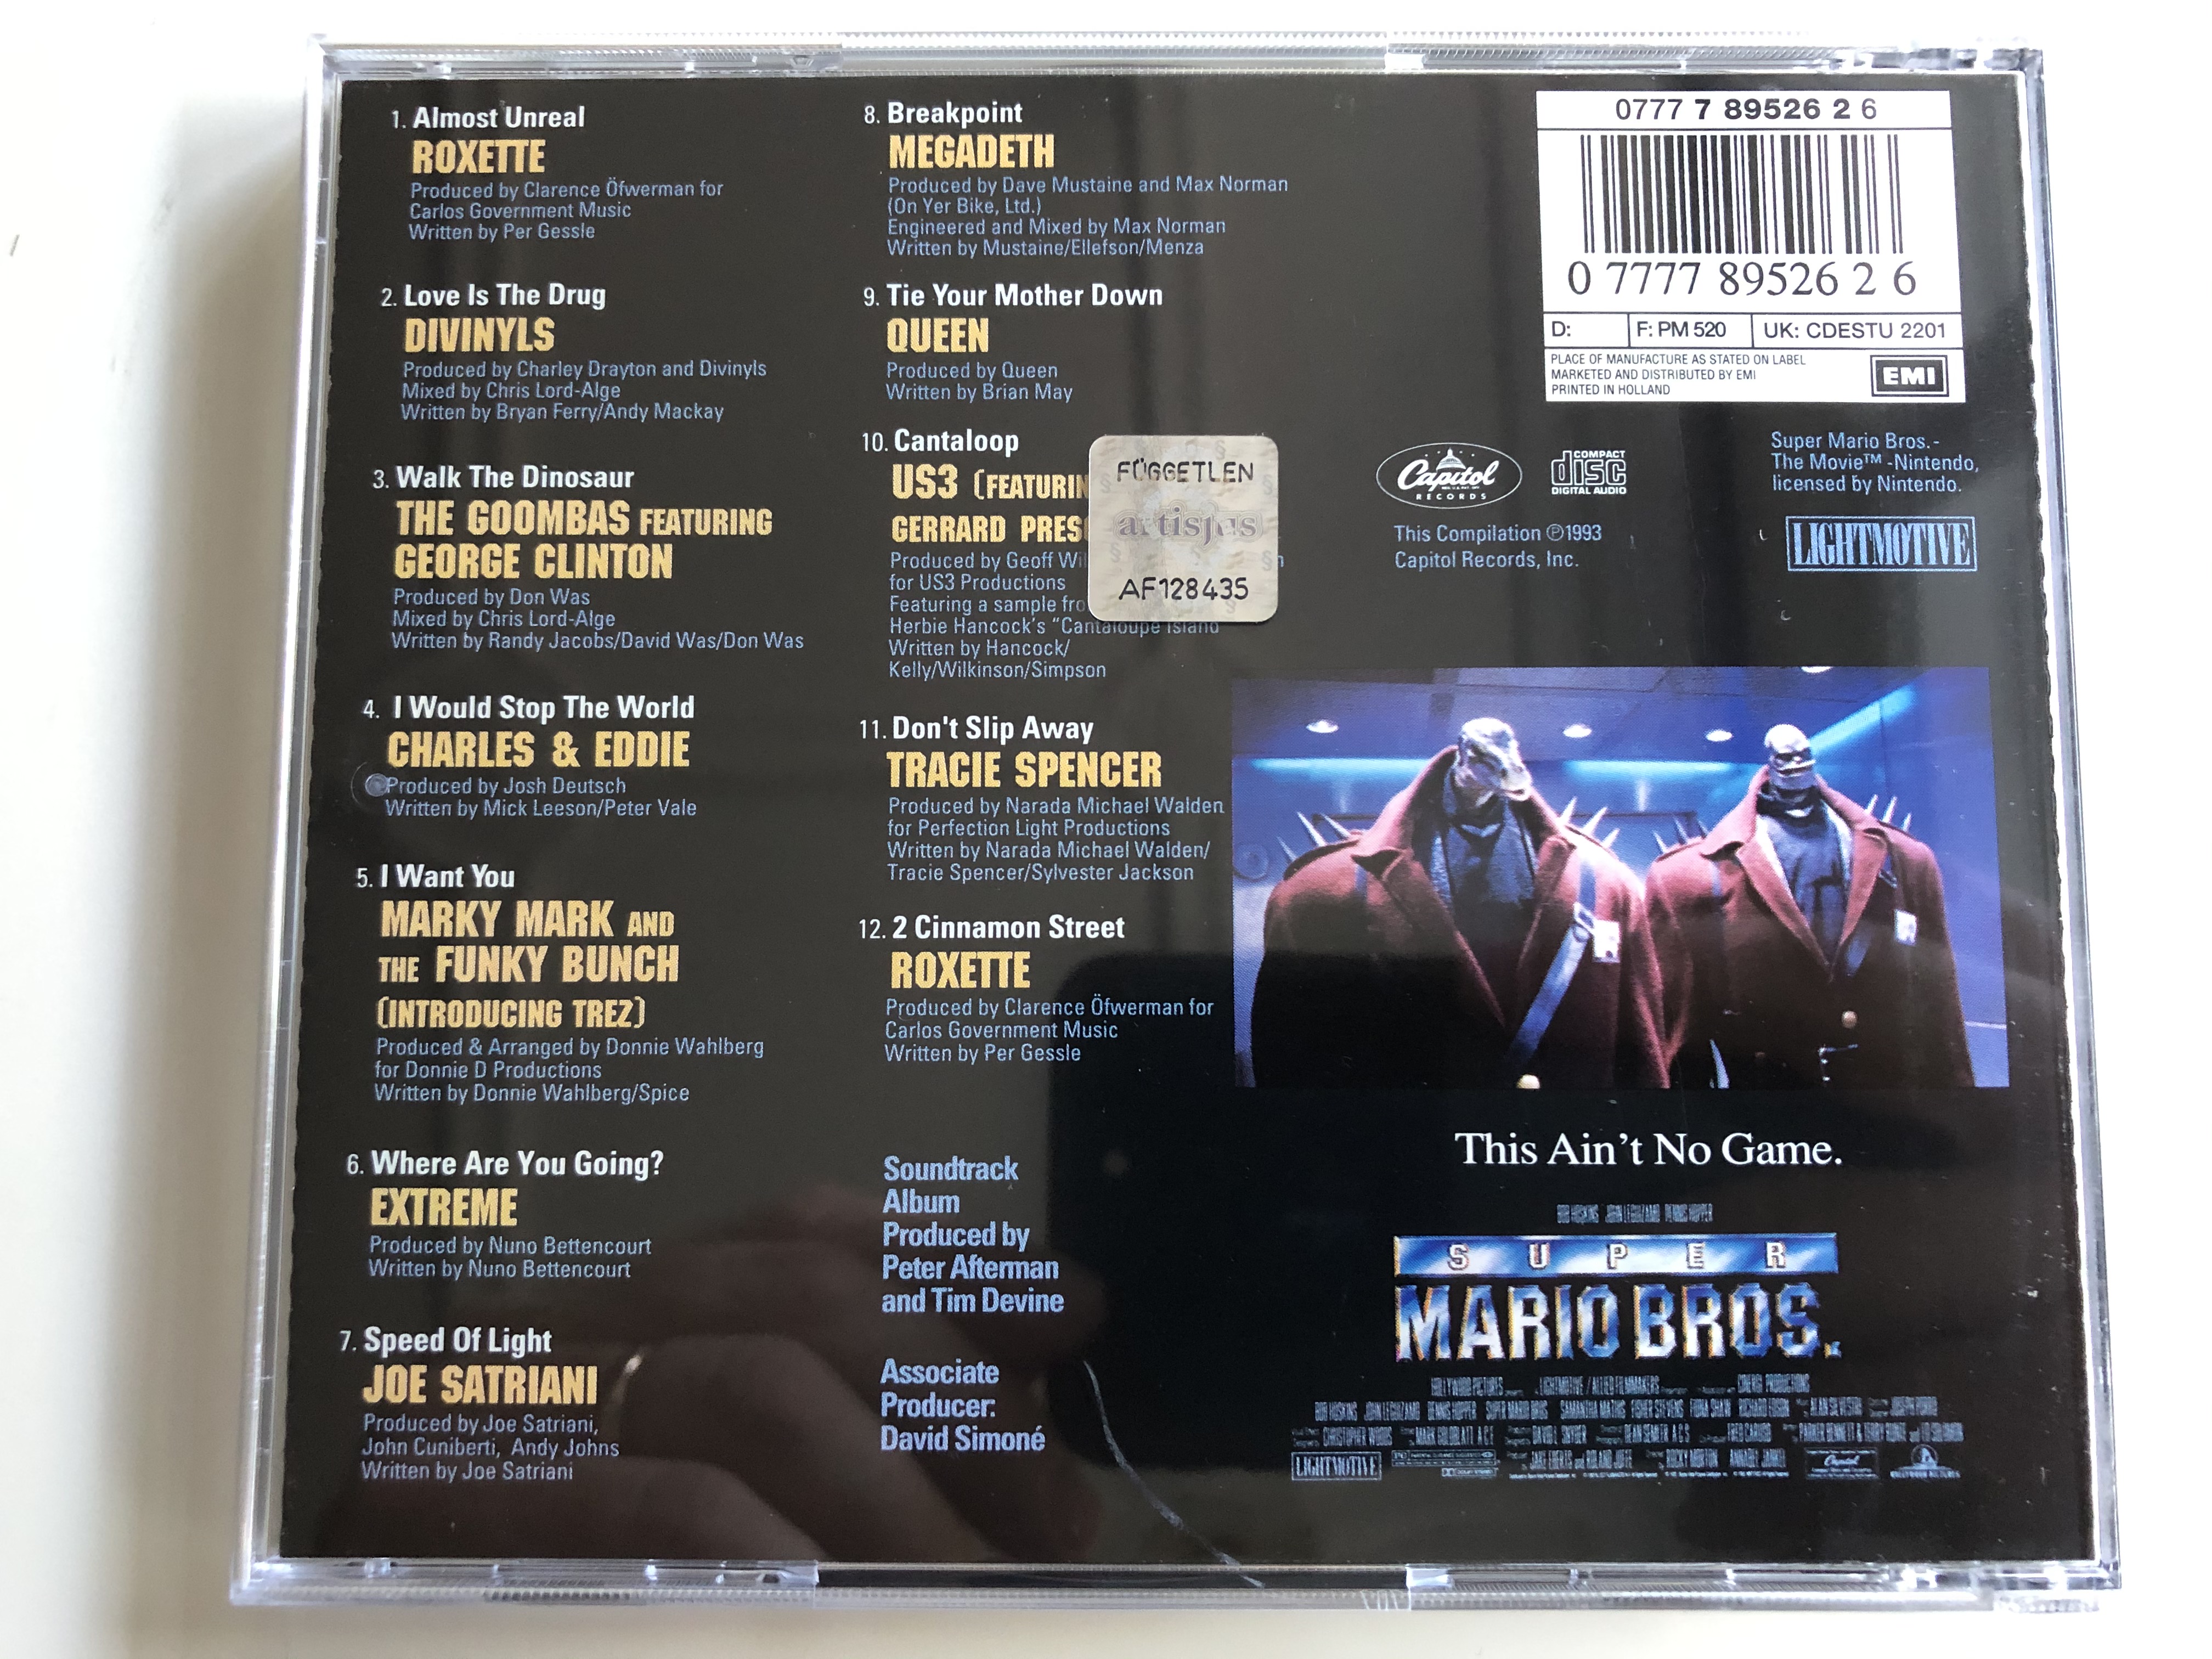 original-motion-picture-soundtrack-super-mario-bros.-featuring-music-from-roxette-extreme-divinlyls-megadeth-george-clinton-joe-satriani-queen-charles-eddie-marky-mark-us3-tracie-4-.jpg